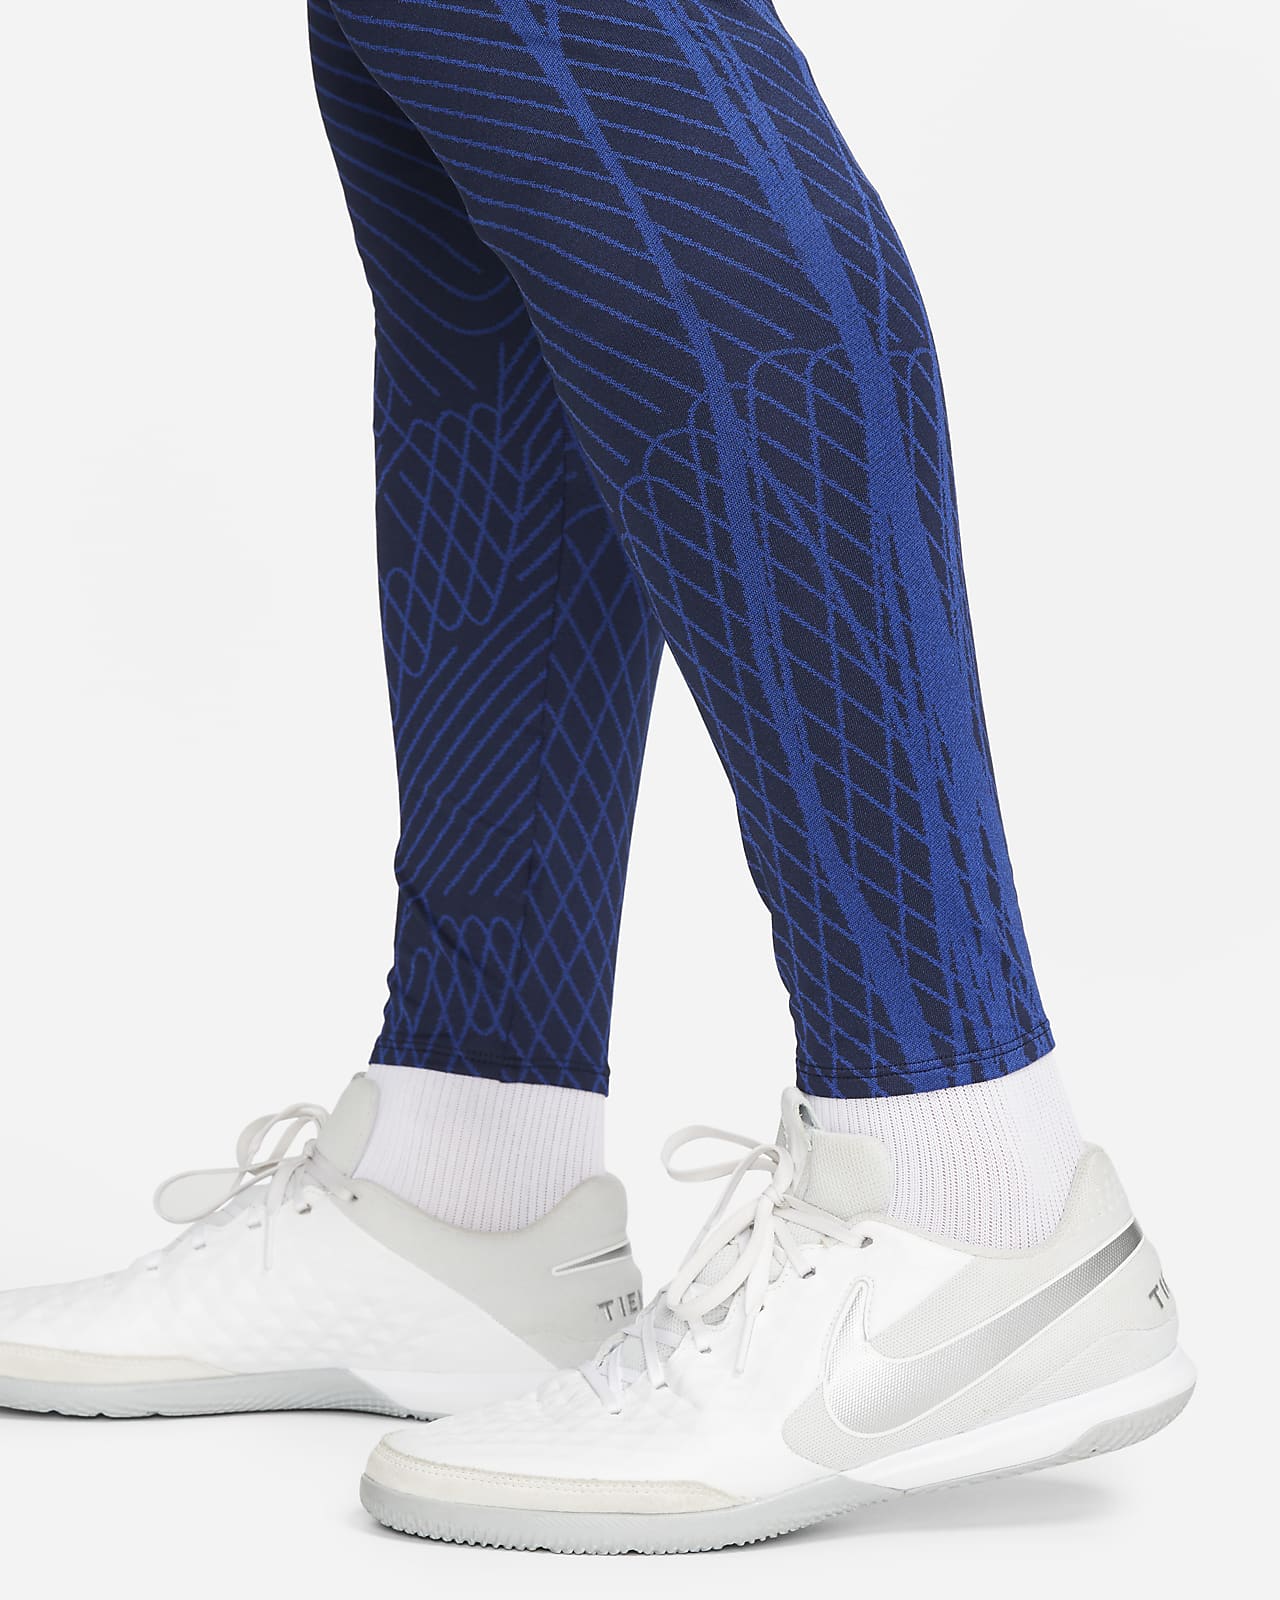 Lower Sports Wear Nike Track Pants For Men at Rs 295/piece in Thane